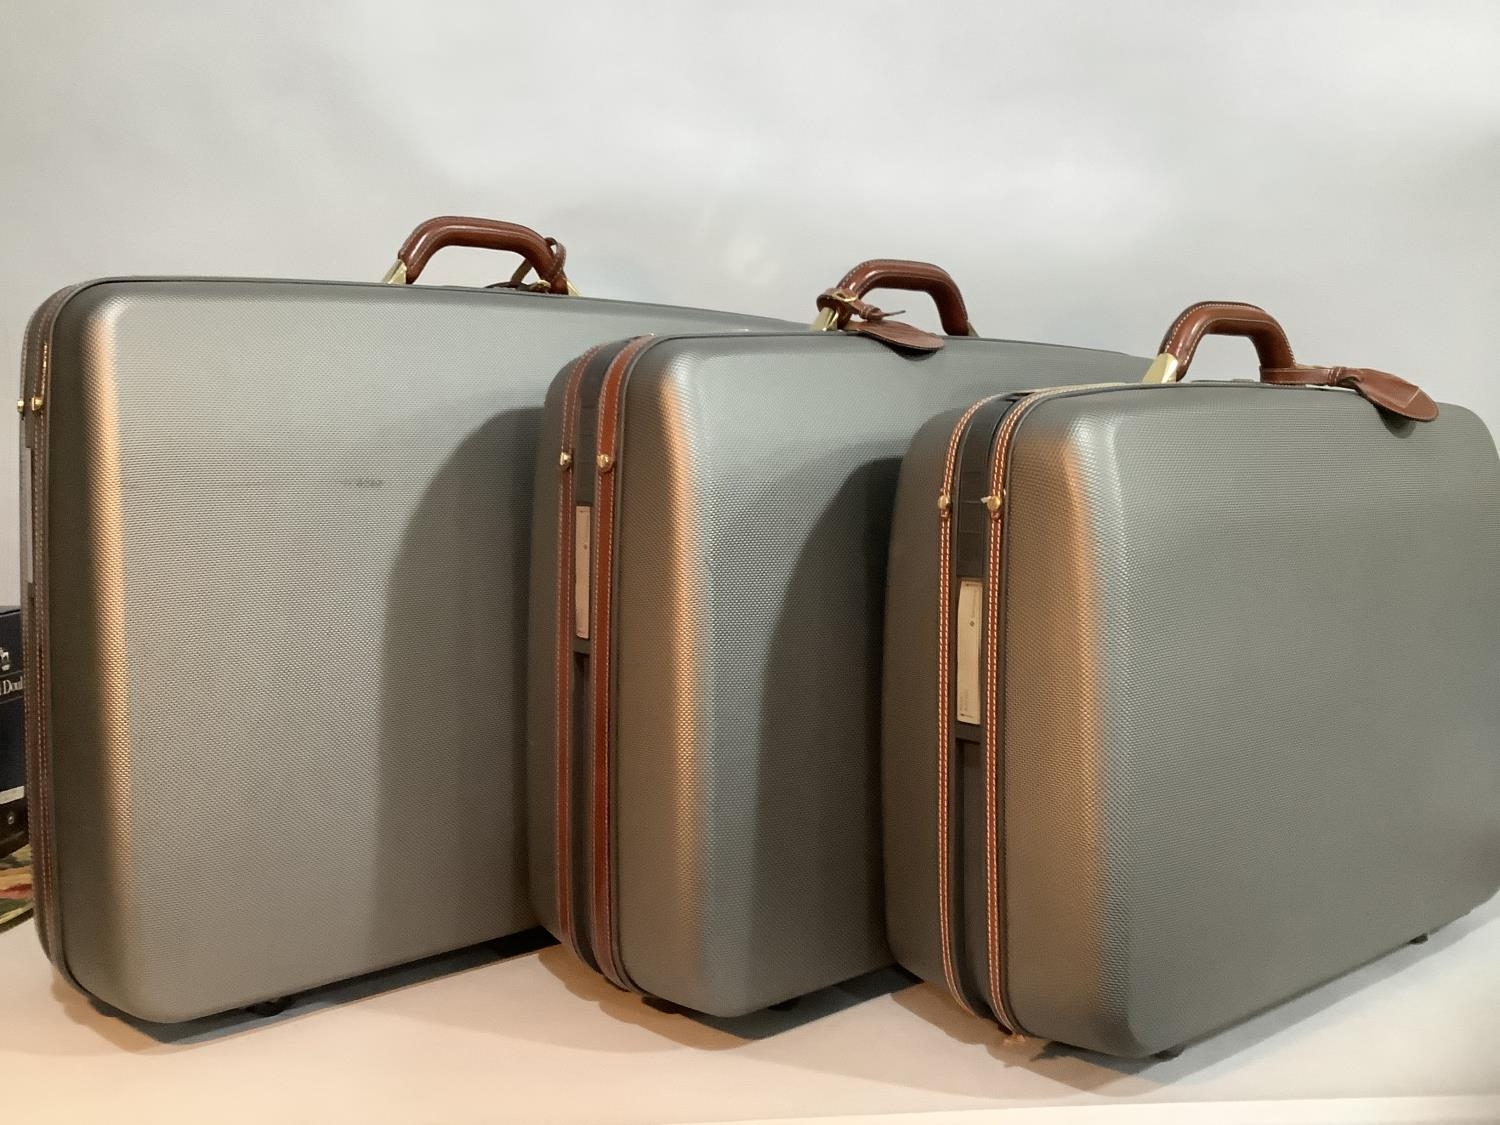 Three Samsonite hard shell grey and leather suitcases with pull-along handles and wheels